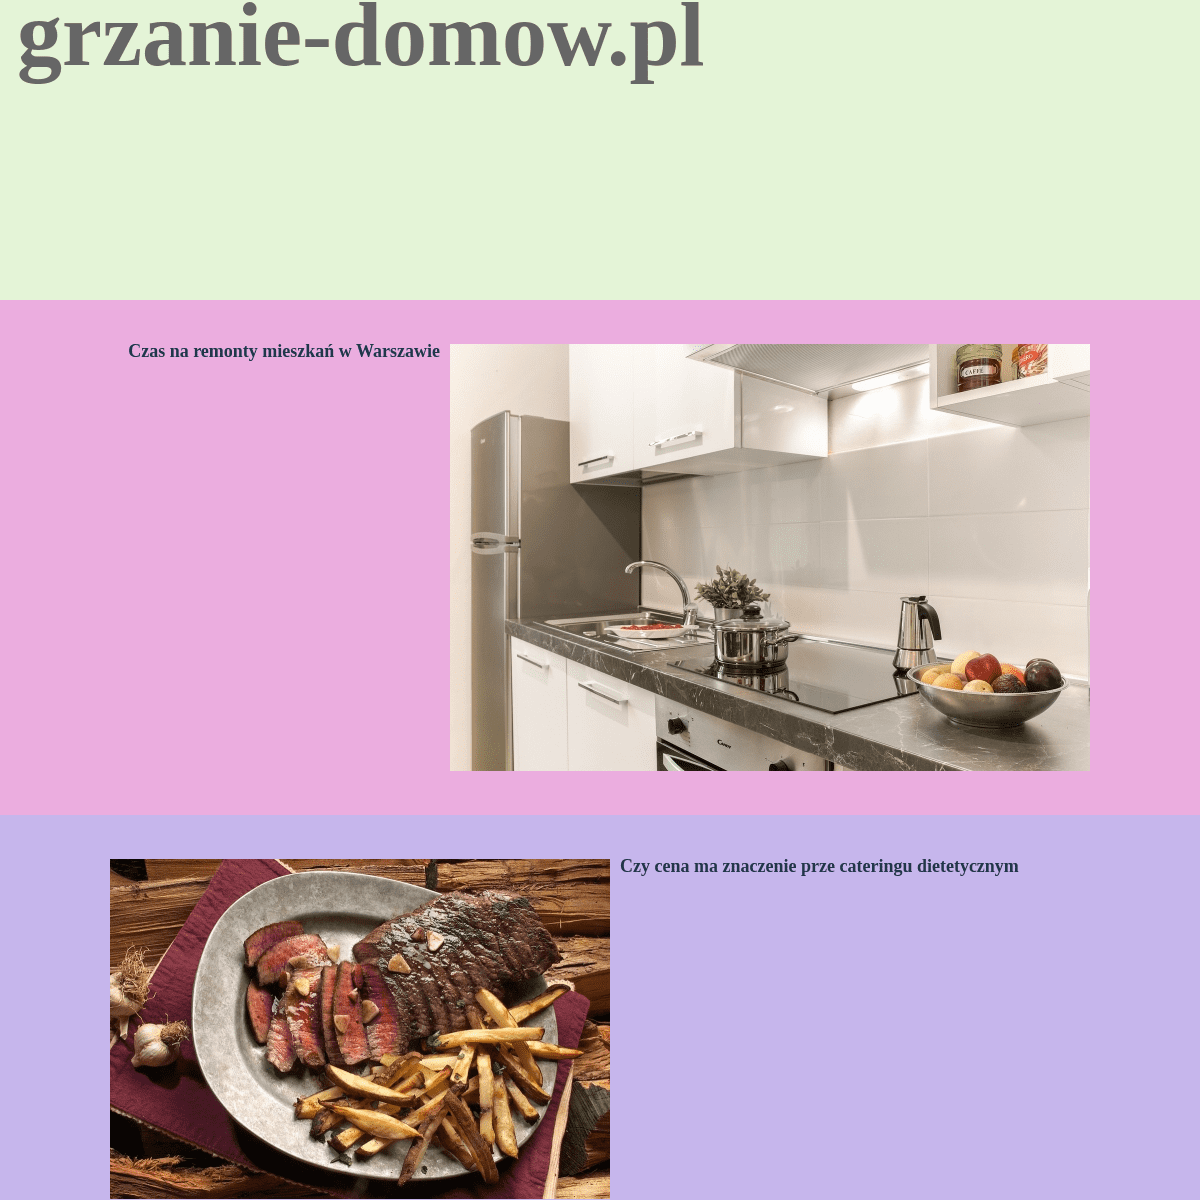 A complete backup of https://grzanie-domow.pl